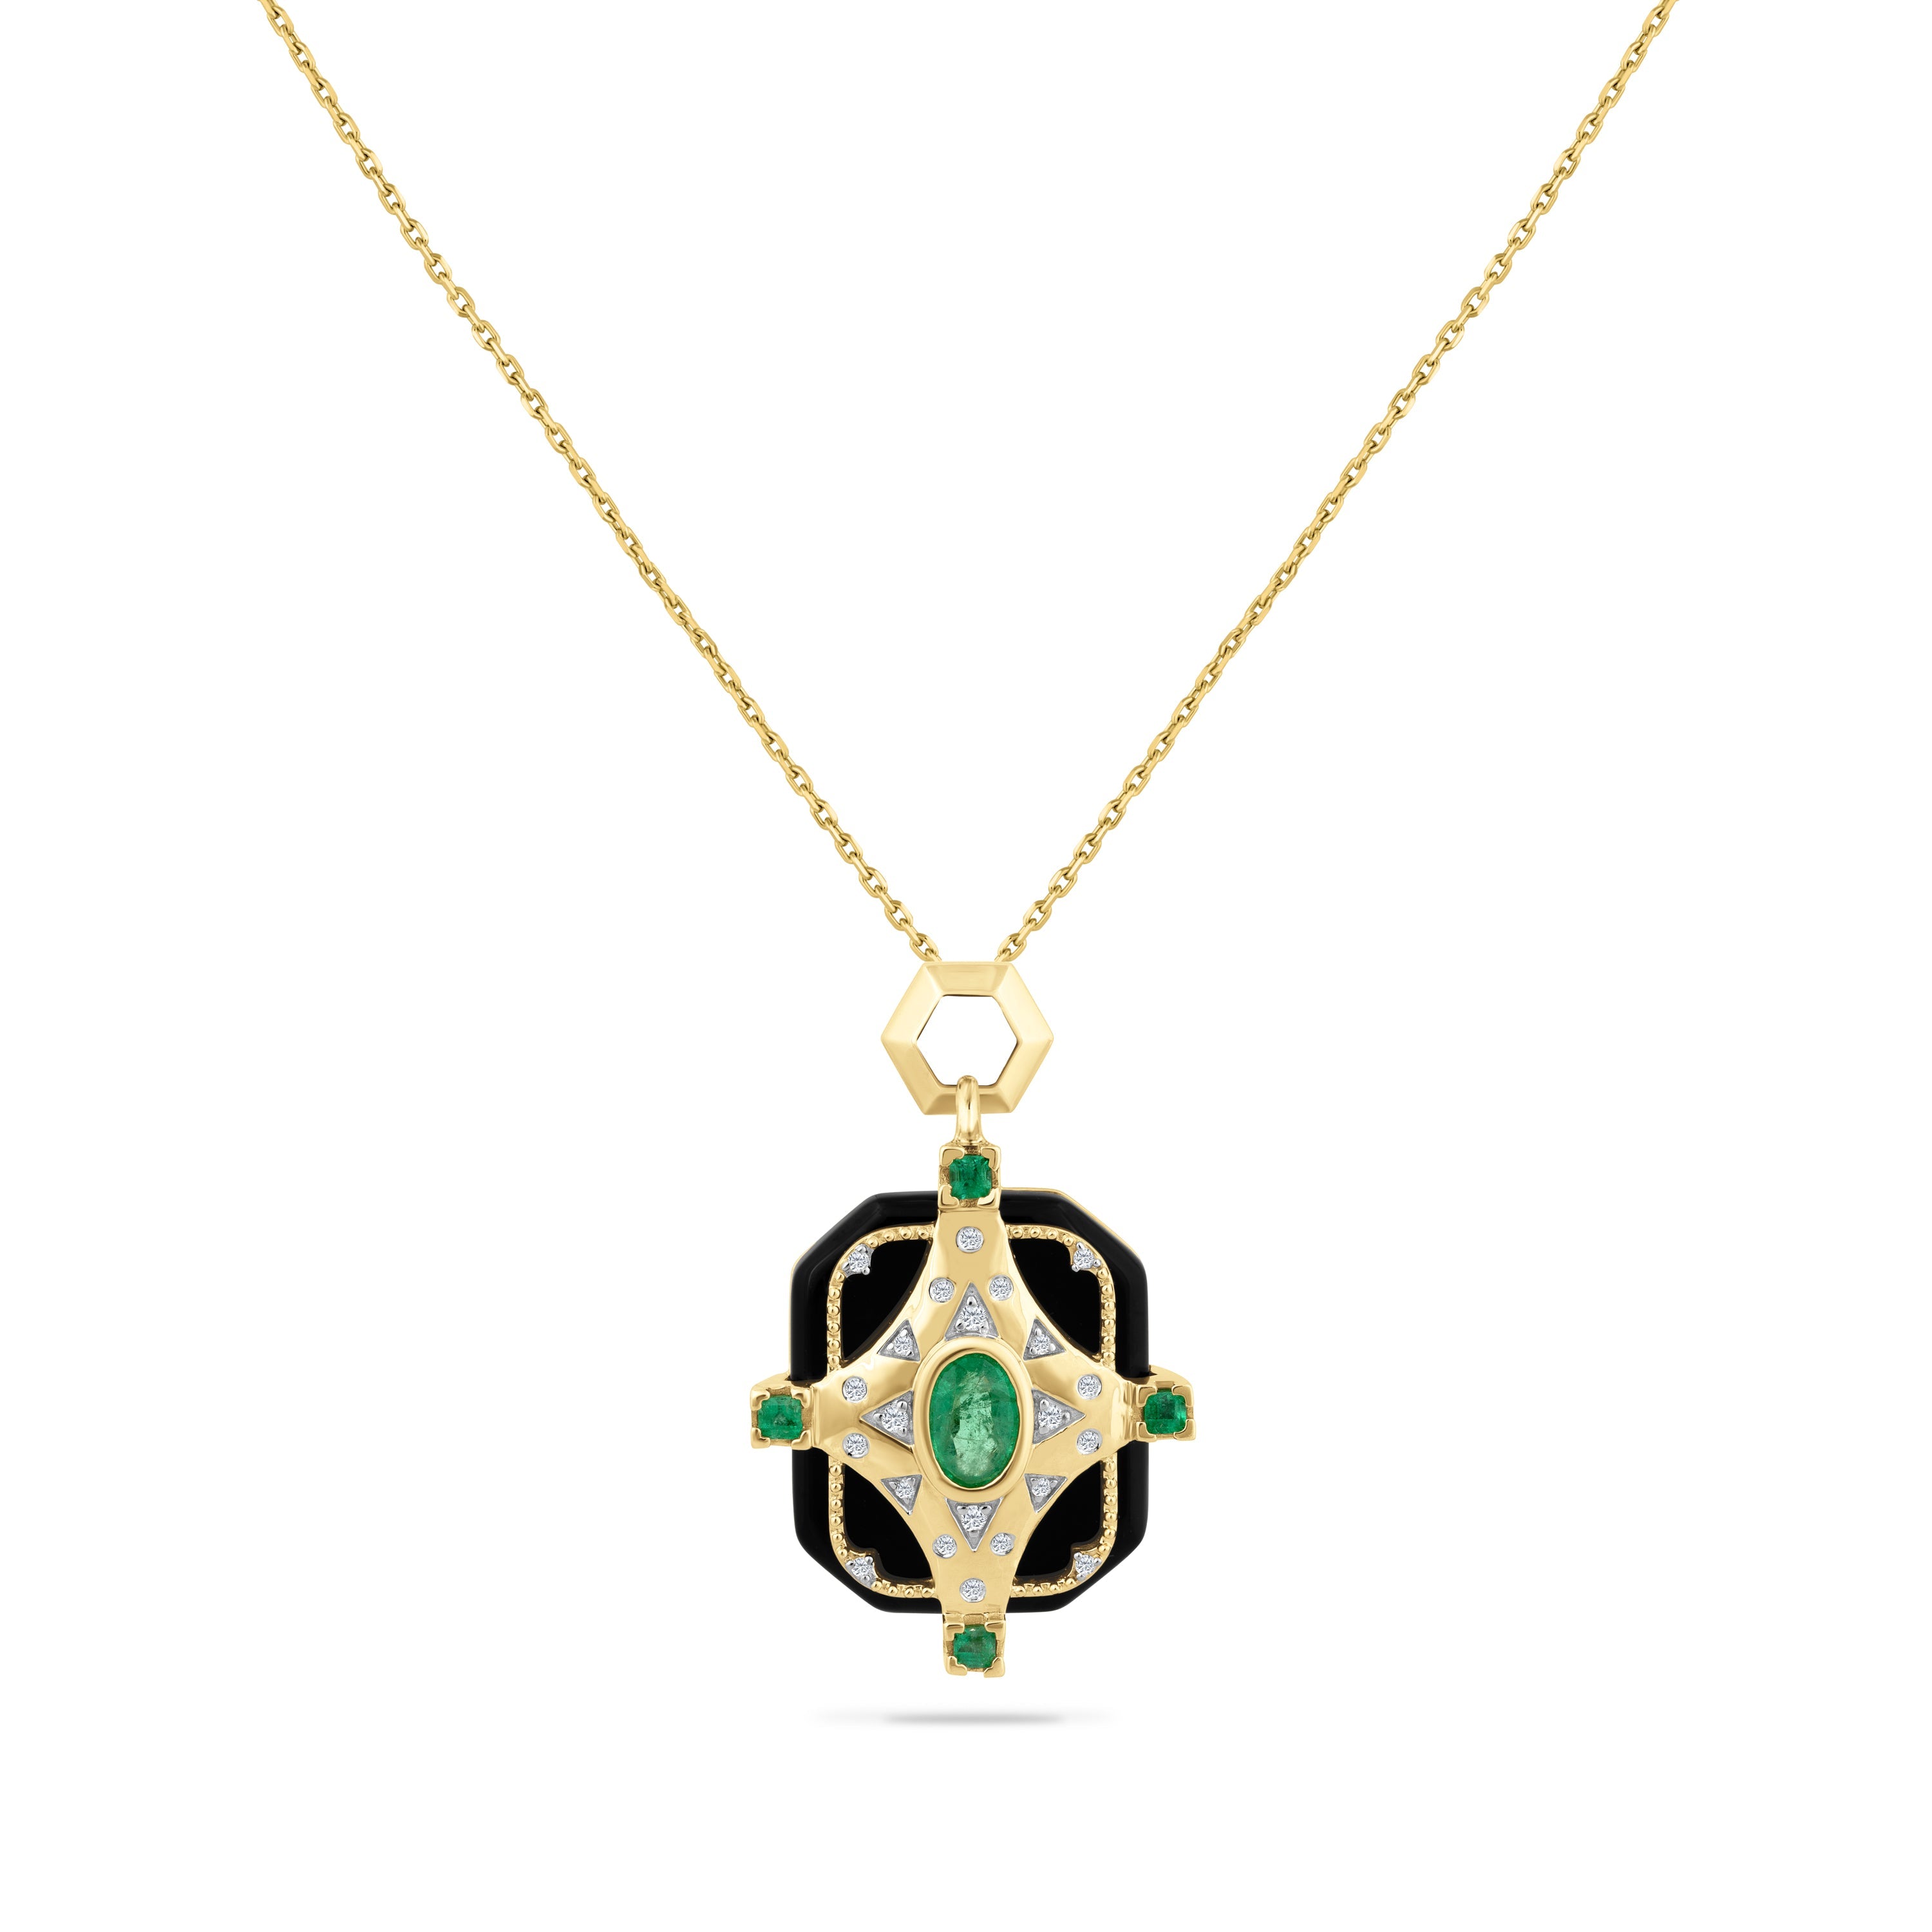 14K PENDANT WITH BLACK ONYX 1.00CT, 22 DIAMONDS 0.09CT, 1 CENTER EMERALD 0.45CT AND 4 EMERALDS 0.16CT ON 18 INCHES CHAIN